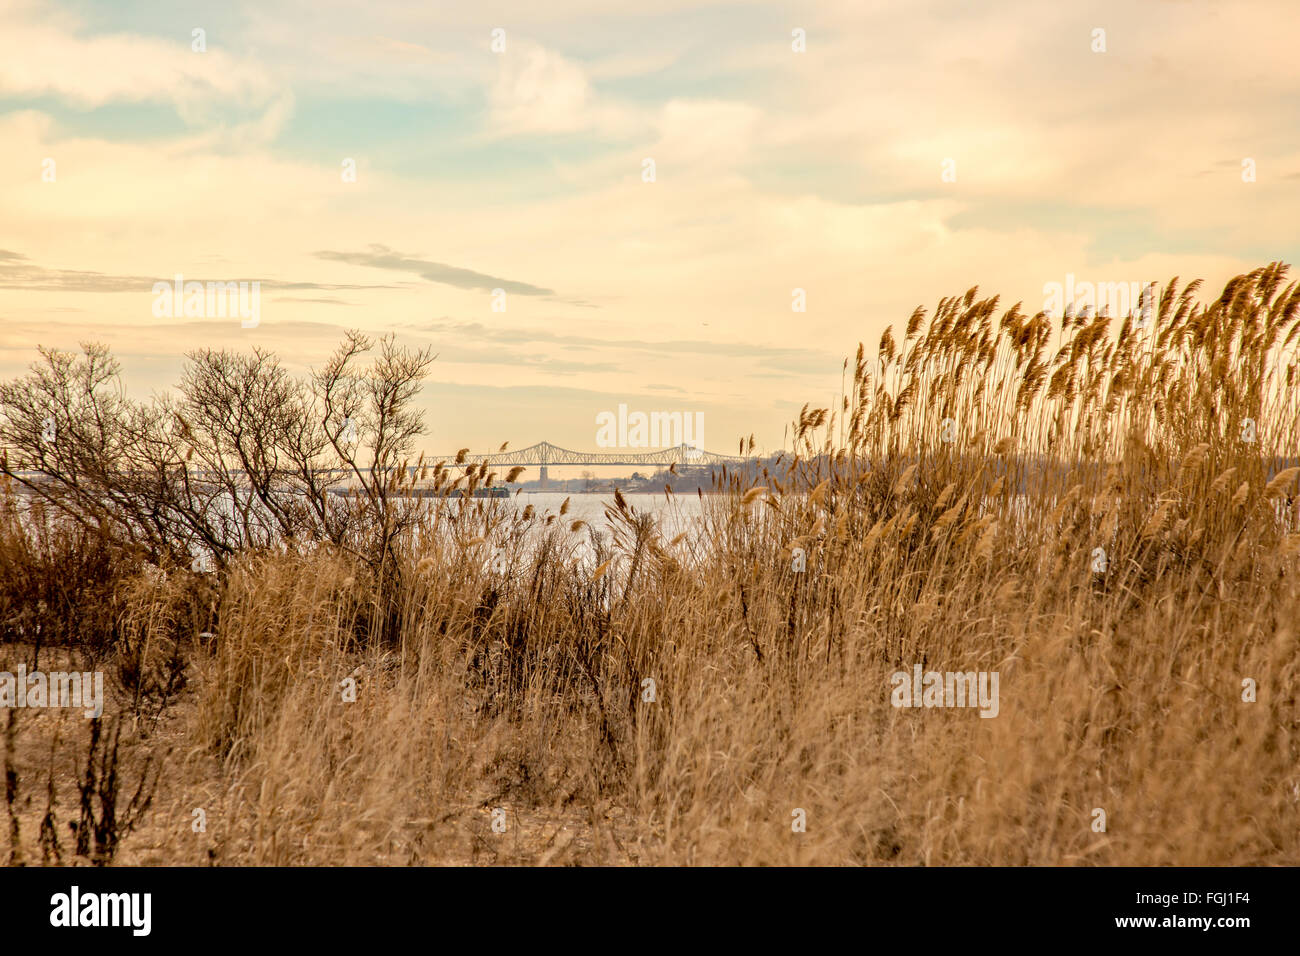 Outerbridge Crossing through the reeds from South Amboy Beach in New Jersey. Stock Photo